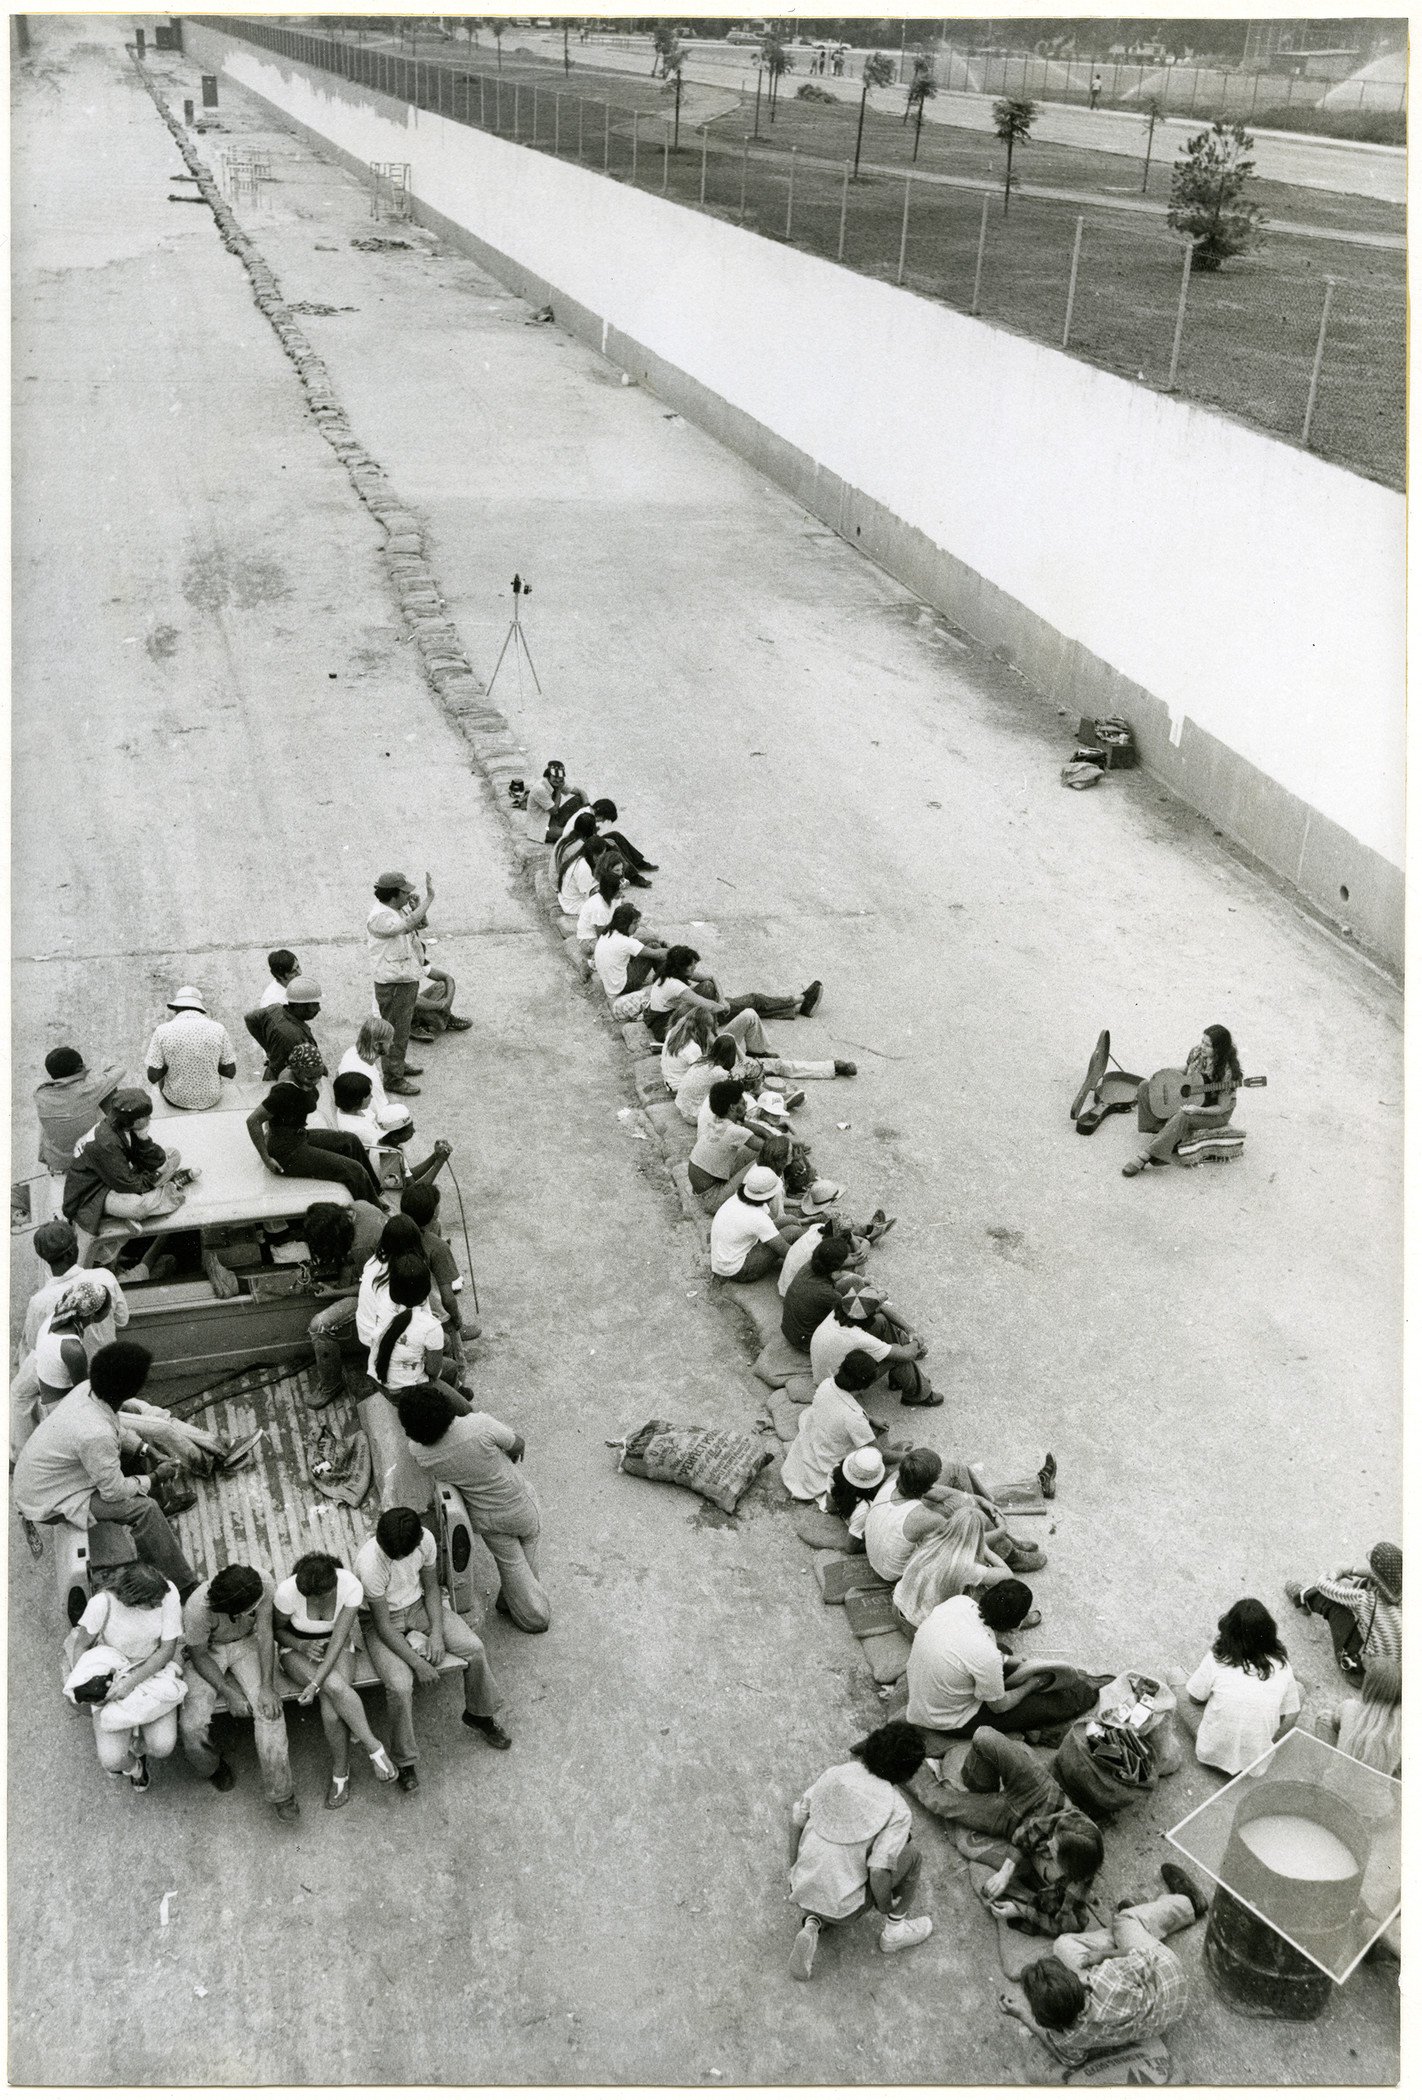  Aerial view of a music performance at&nbsp; The Great Wall of Los Angeles ,&nbsp;© SPARC 1981, courtesy of Judith F. Baca and the SPARC archives. Photo: Linda Eber, 1981.&nbsp; 